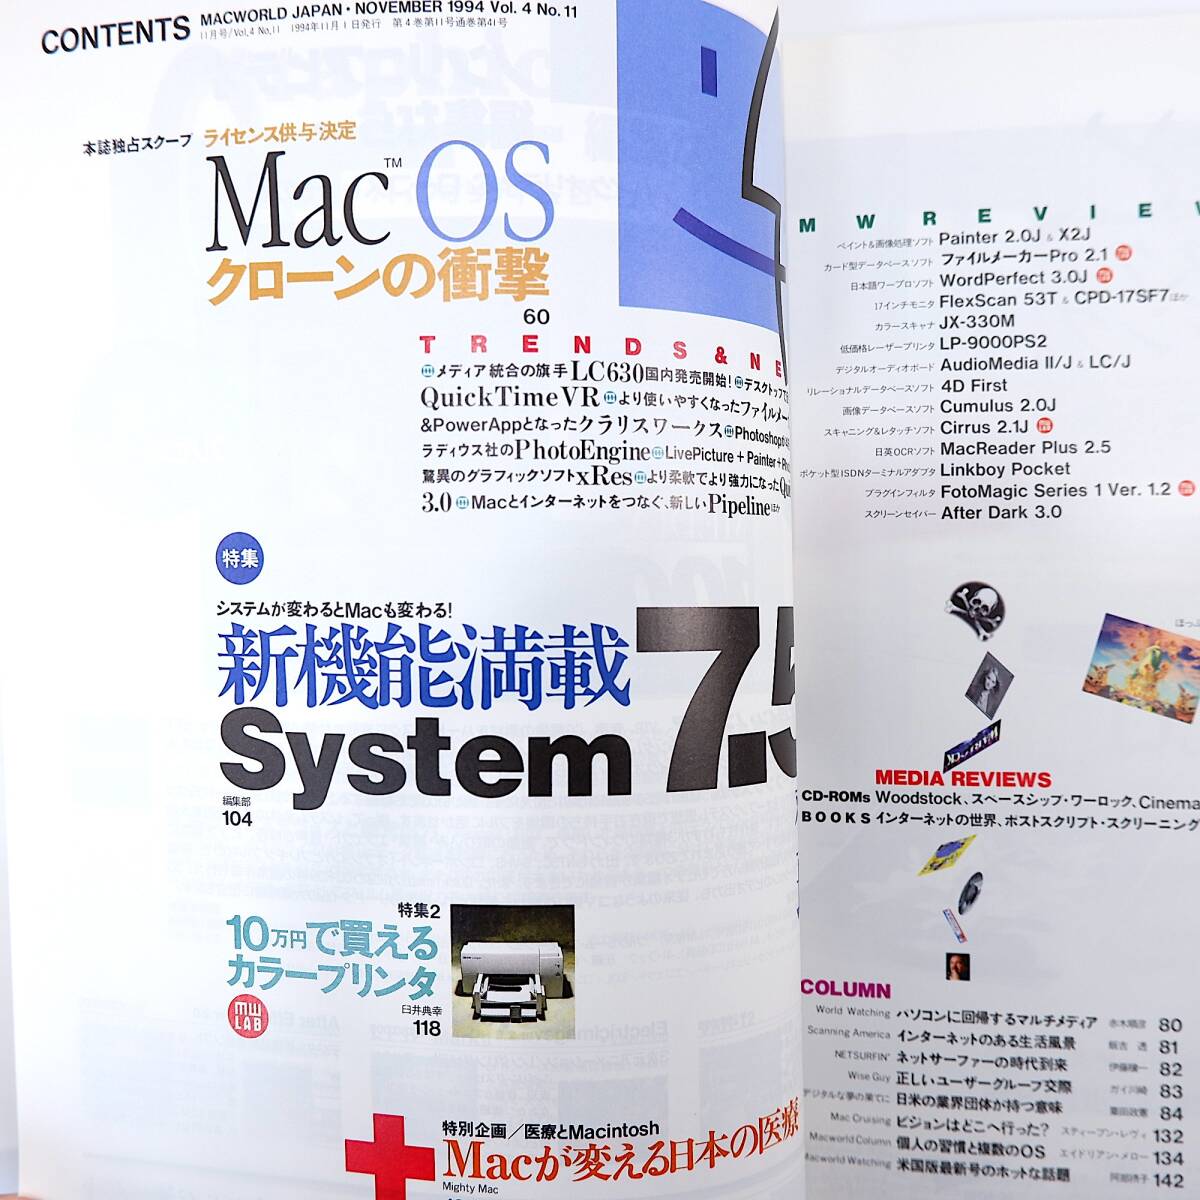 Macworld 1994 year 11 month number |MacOS license ..LC630 System7.5 10 ten thousand jpy . can buy color printer Mac. change japanese medical care Mac world 